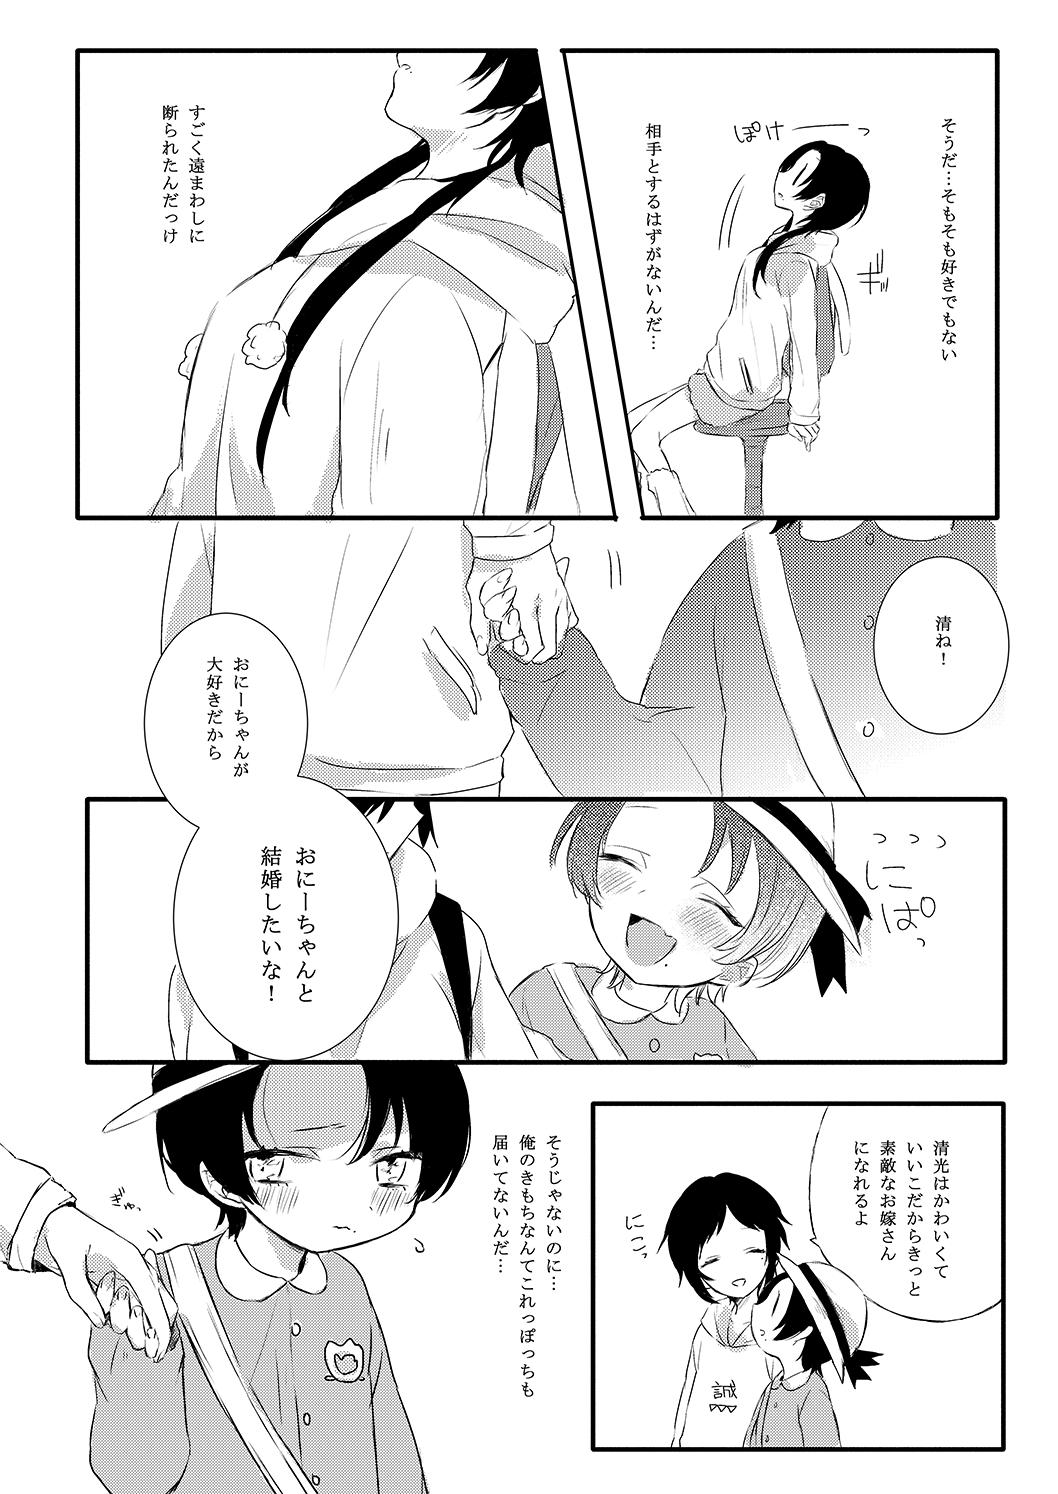 Natural Tits BROTHER COMPLEX + SISTER COMPLEX - Touken ranbu Canadian - Page 7